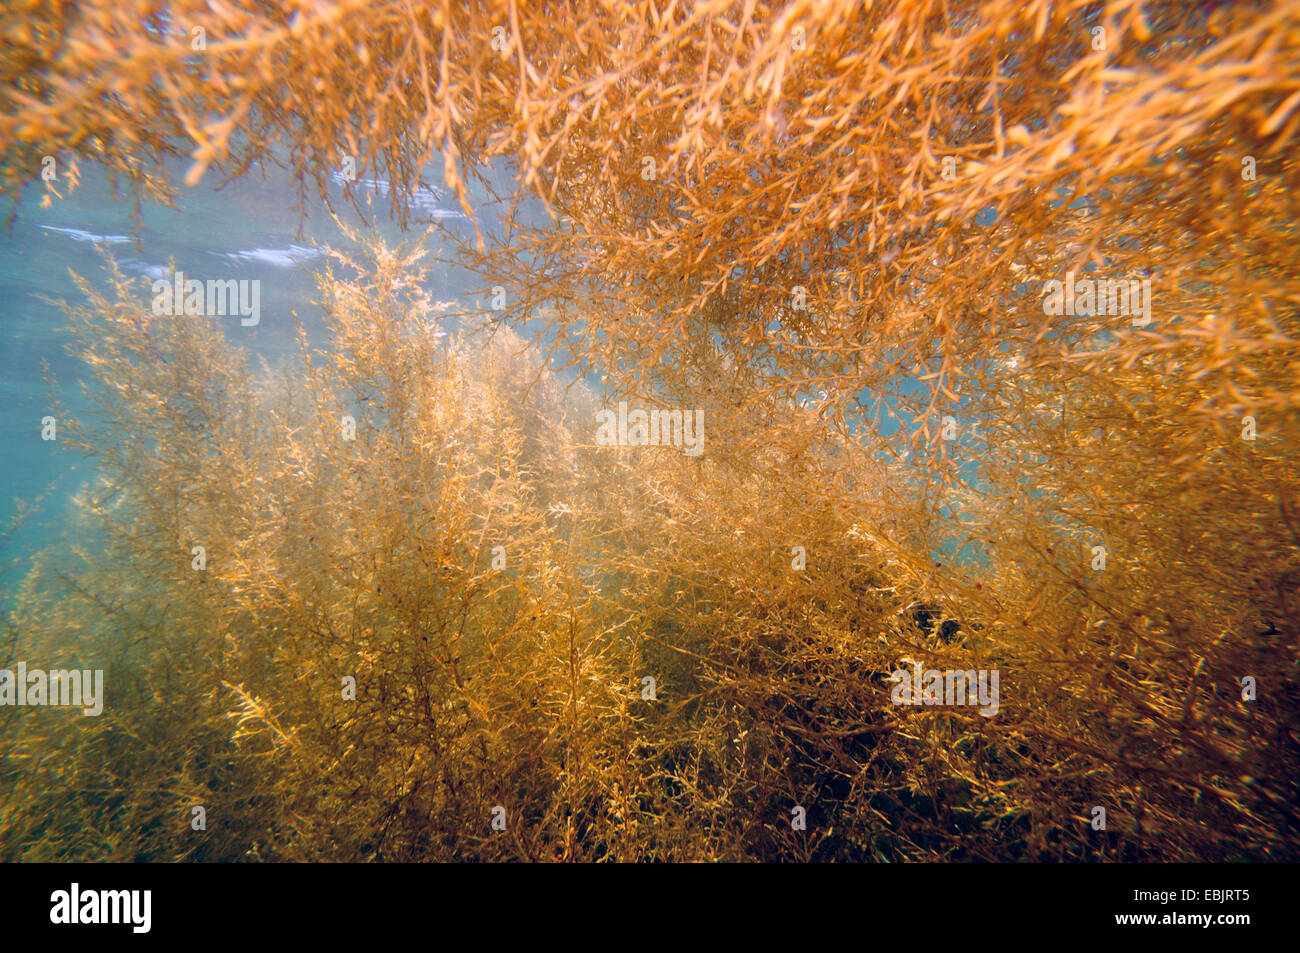 sea weeds under water, France, Brittany Stock Photo